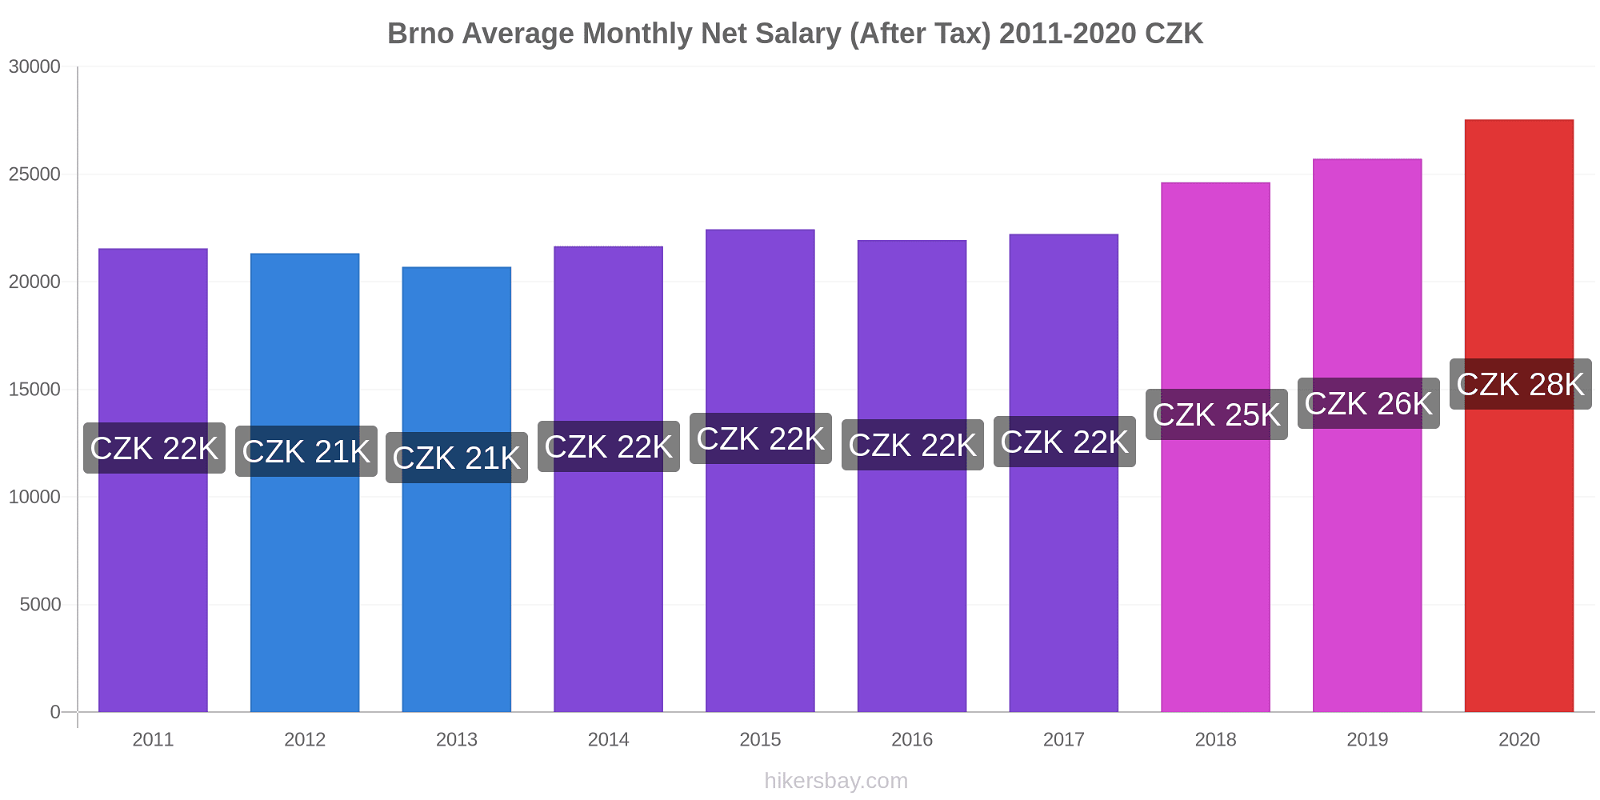 Brno price changes Average Monthly Net Salary (After Tax) hikersbay.com